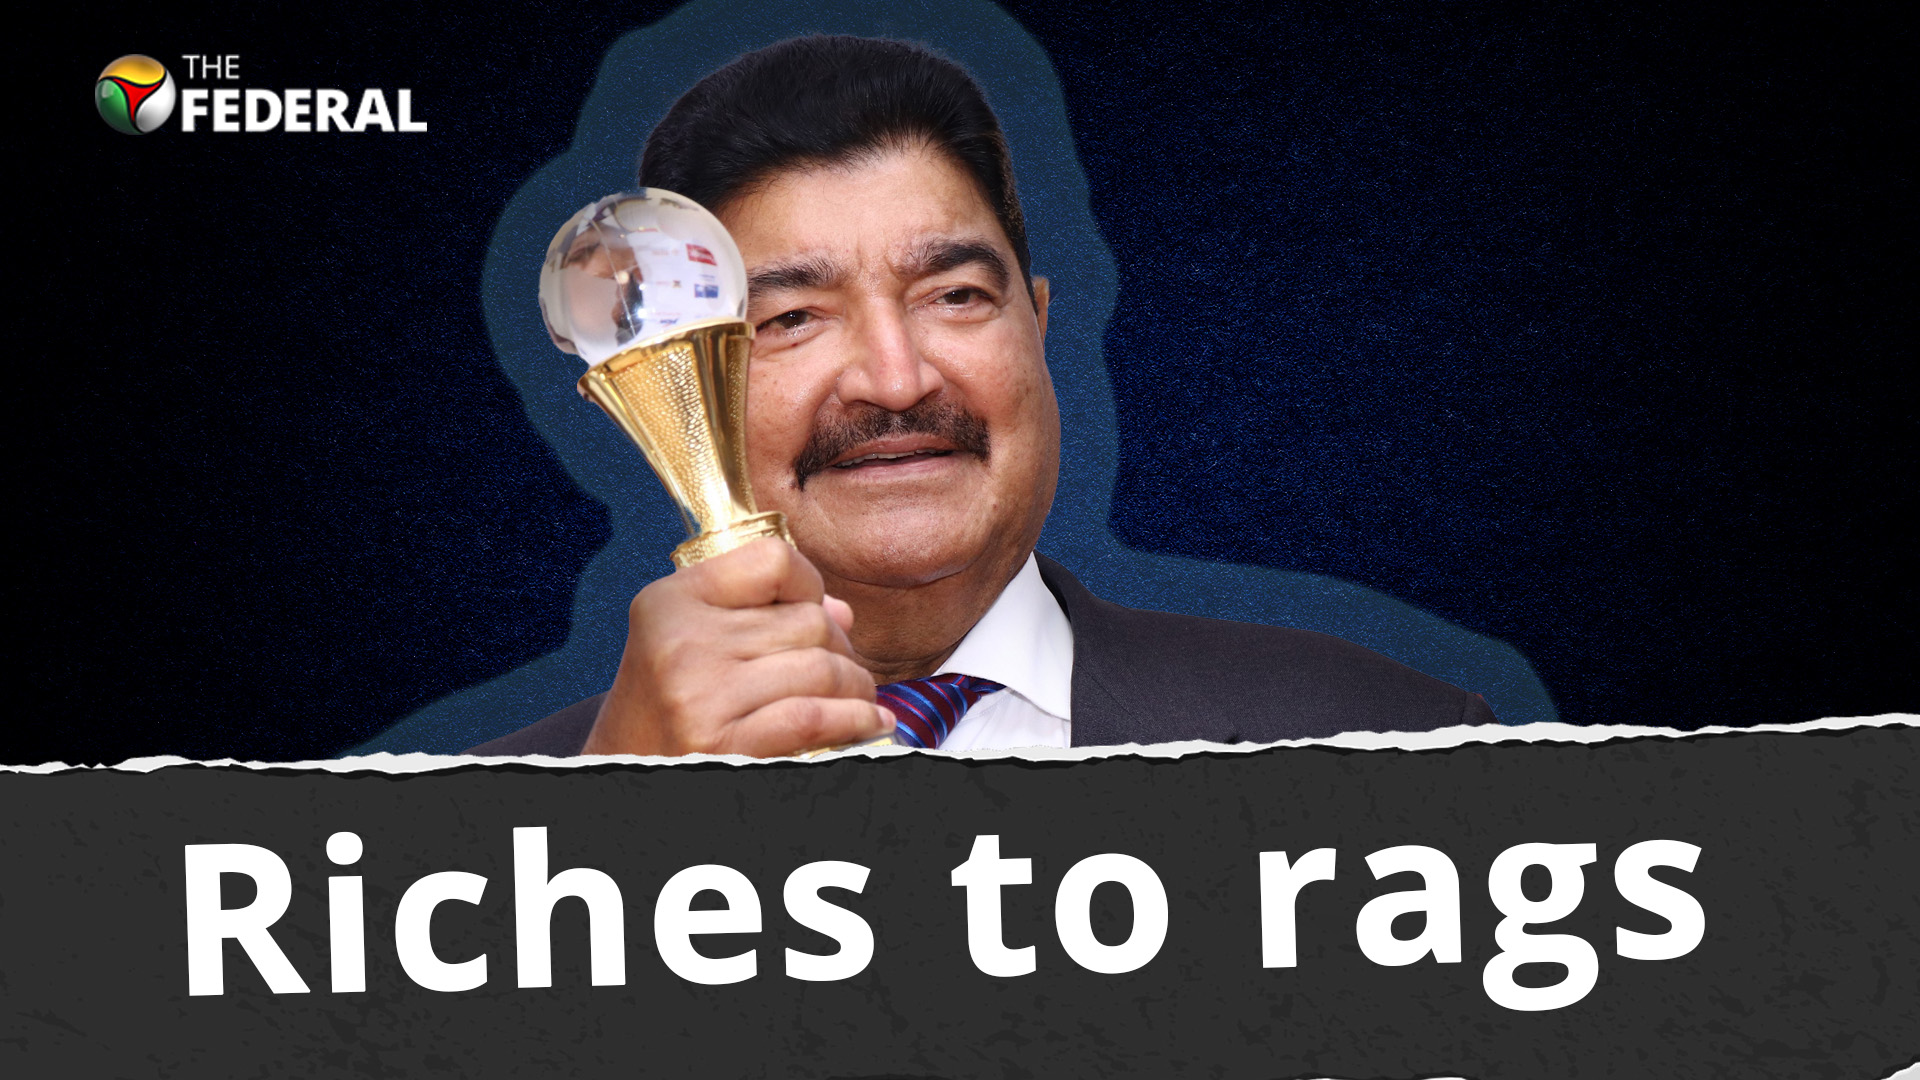 Riches to rags: B R Shetty’s breathtaking rise and steep fall from $2 billion to $1